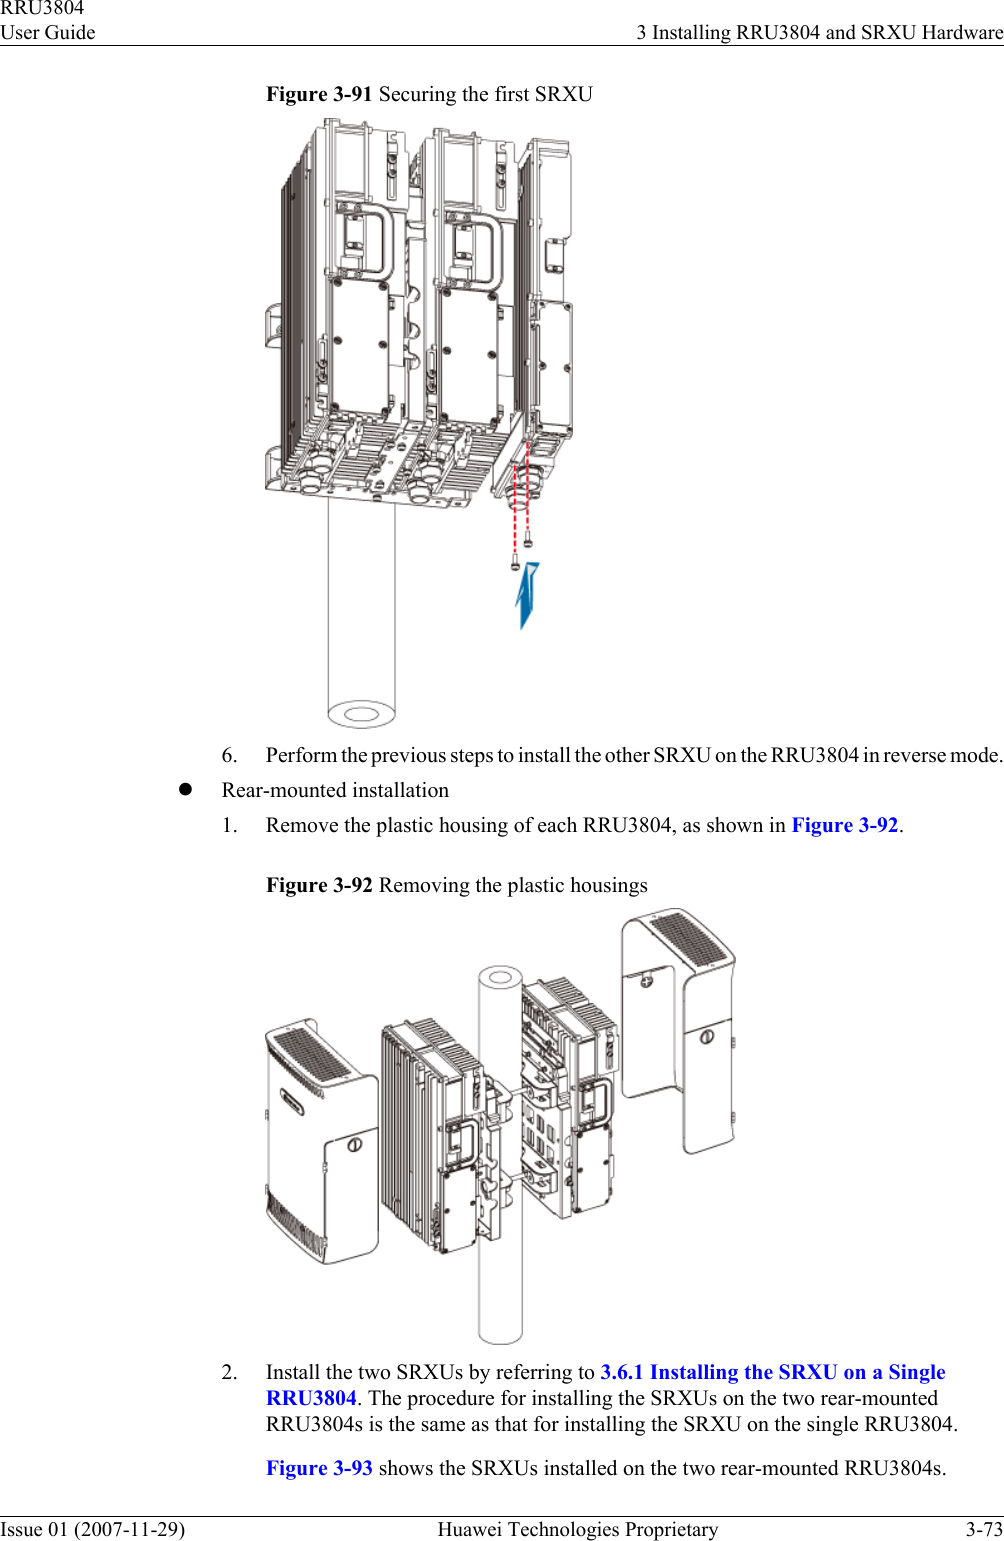 Figure 3-91 Securing the first SRXU6. Perform the previous steps to install the other SRXU on the RRU3804 in reverse mode.lRear-mounted installation1. Remove the plastic housing of each RRU3804, as shown in Figure 3-92.Figure 3-92 Removing the plastic housings2. Install the two SRXUs by referring to 3.6.1 Installing the SRXU on a SingleRRU3804. The procedure for installing the SRXUs on the two rear-mountedRRU3804s is the same as that for installing the SRXU on the single RRU3804.Figure 3-93 shows the SRXUs installed on the two rear-mounted RRU3804s.RRU3804User Guide 3 Installing RRU3804 and SRXU HardwareIssue 01 (2007-11-29)  Huawei Technologies Proprietary 3-73